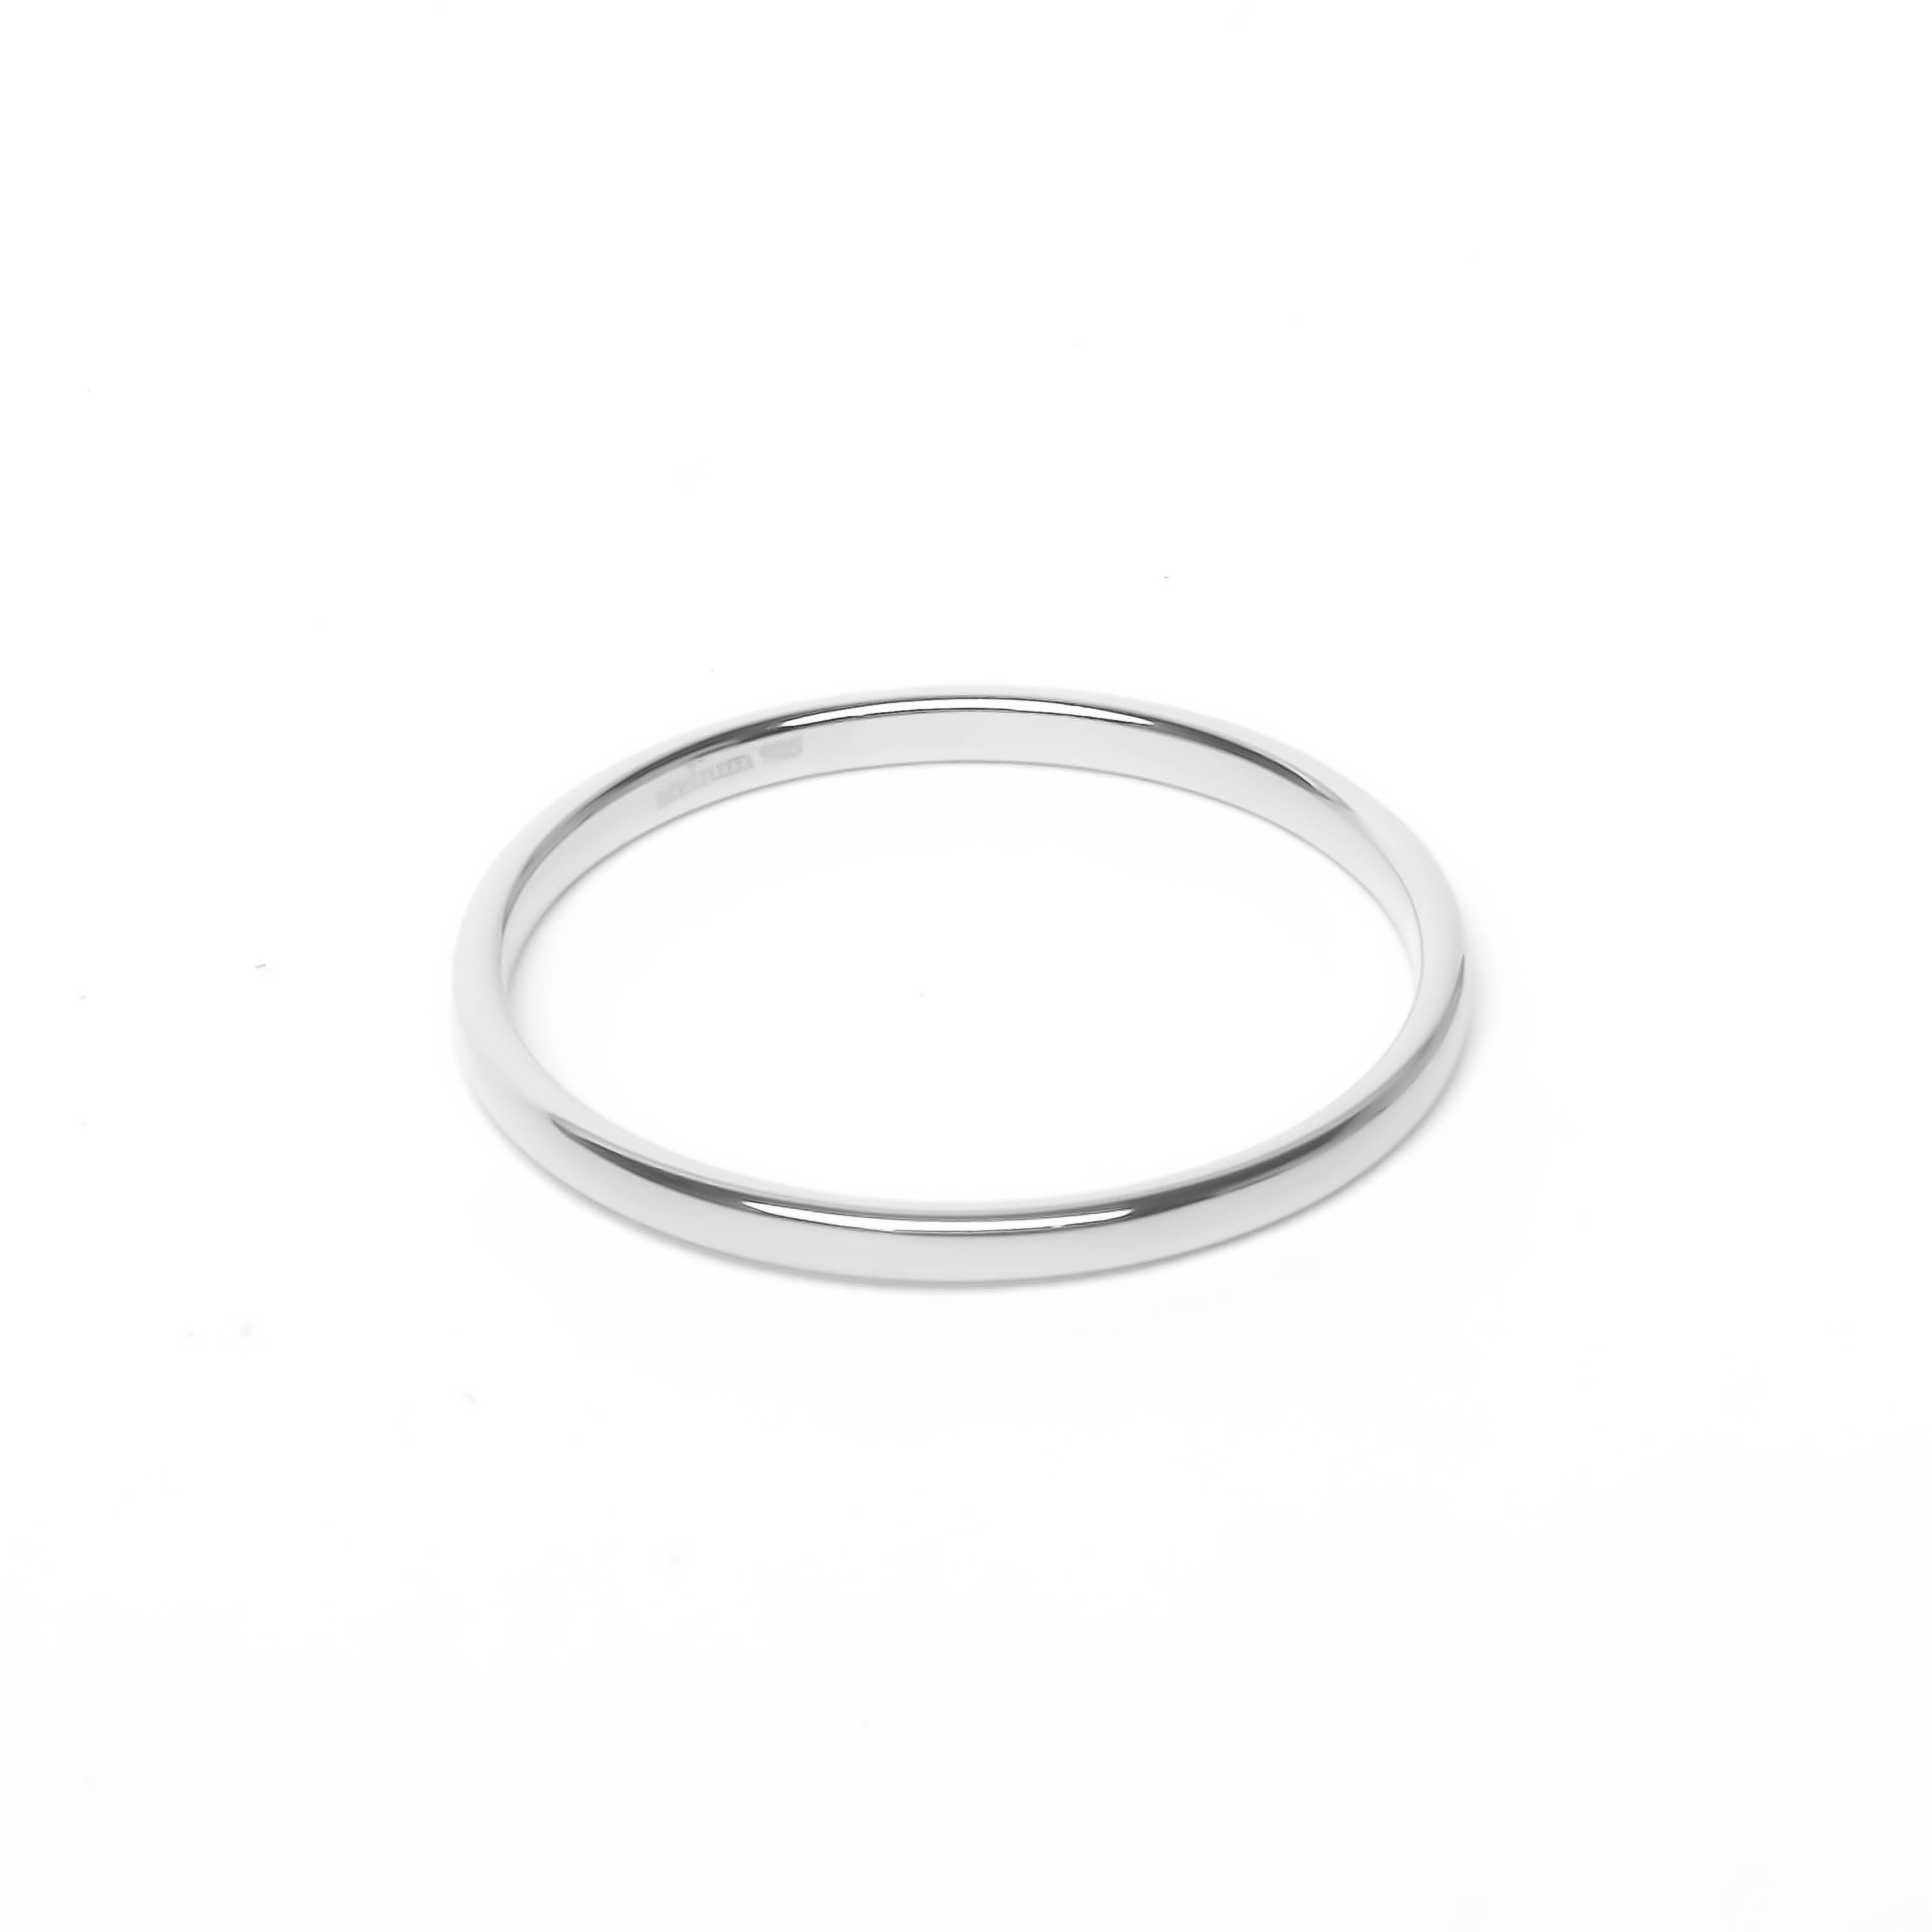 Cutekart_Thin Plain Sterling Silver Band Ring Wedding Engagement for Women  Men – Width 2MM 100% Authentic